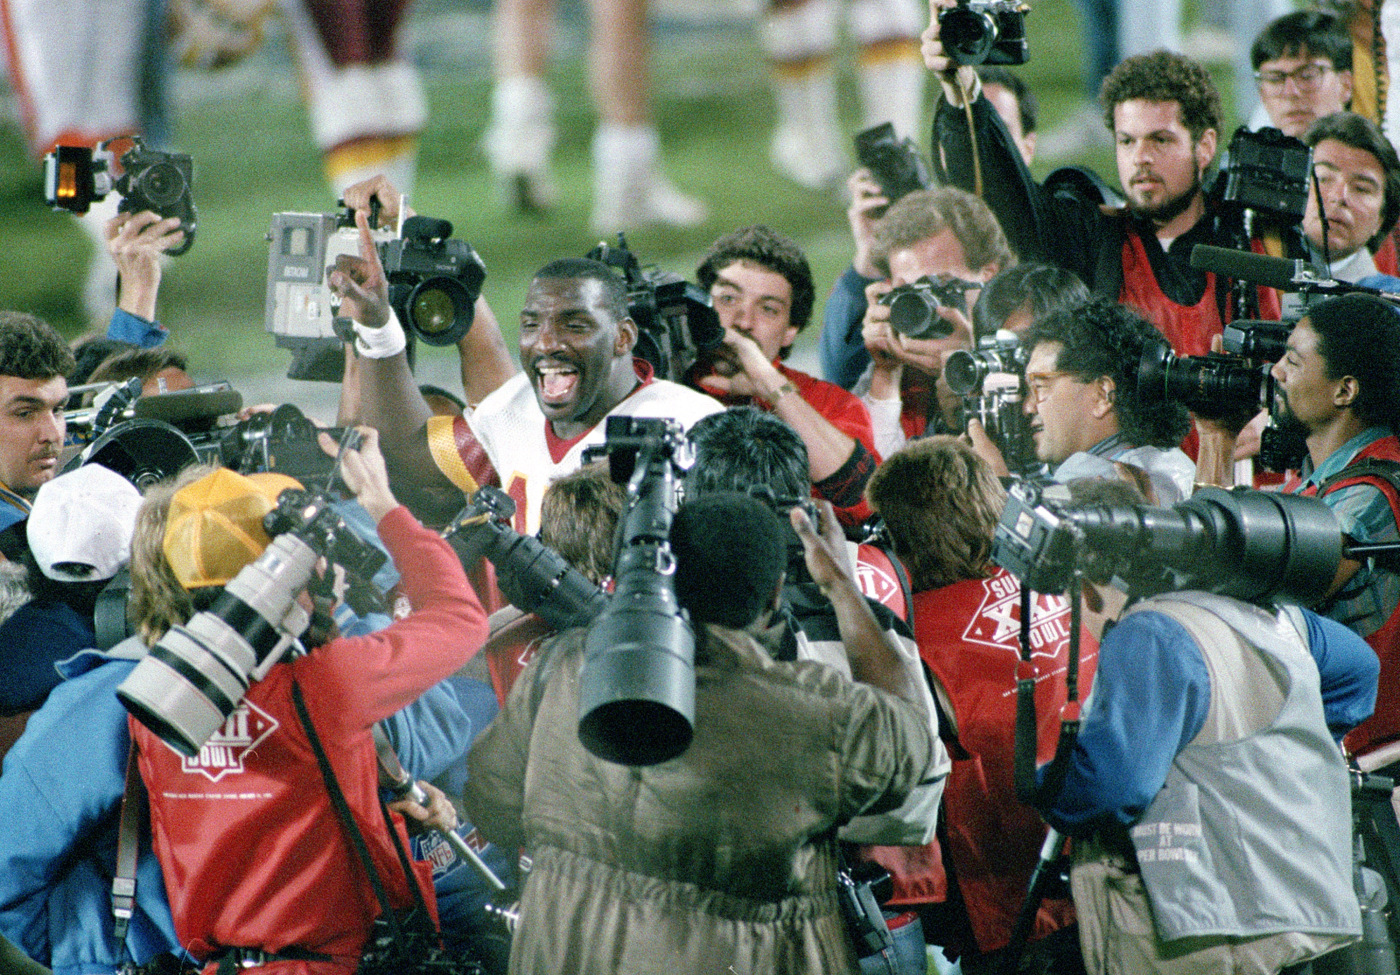 Happy birthday to Doug Williams, the 1st Black QB to start and win a Super Bowl!!!  